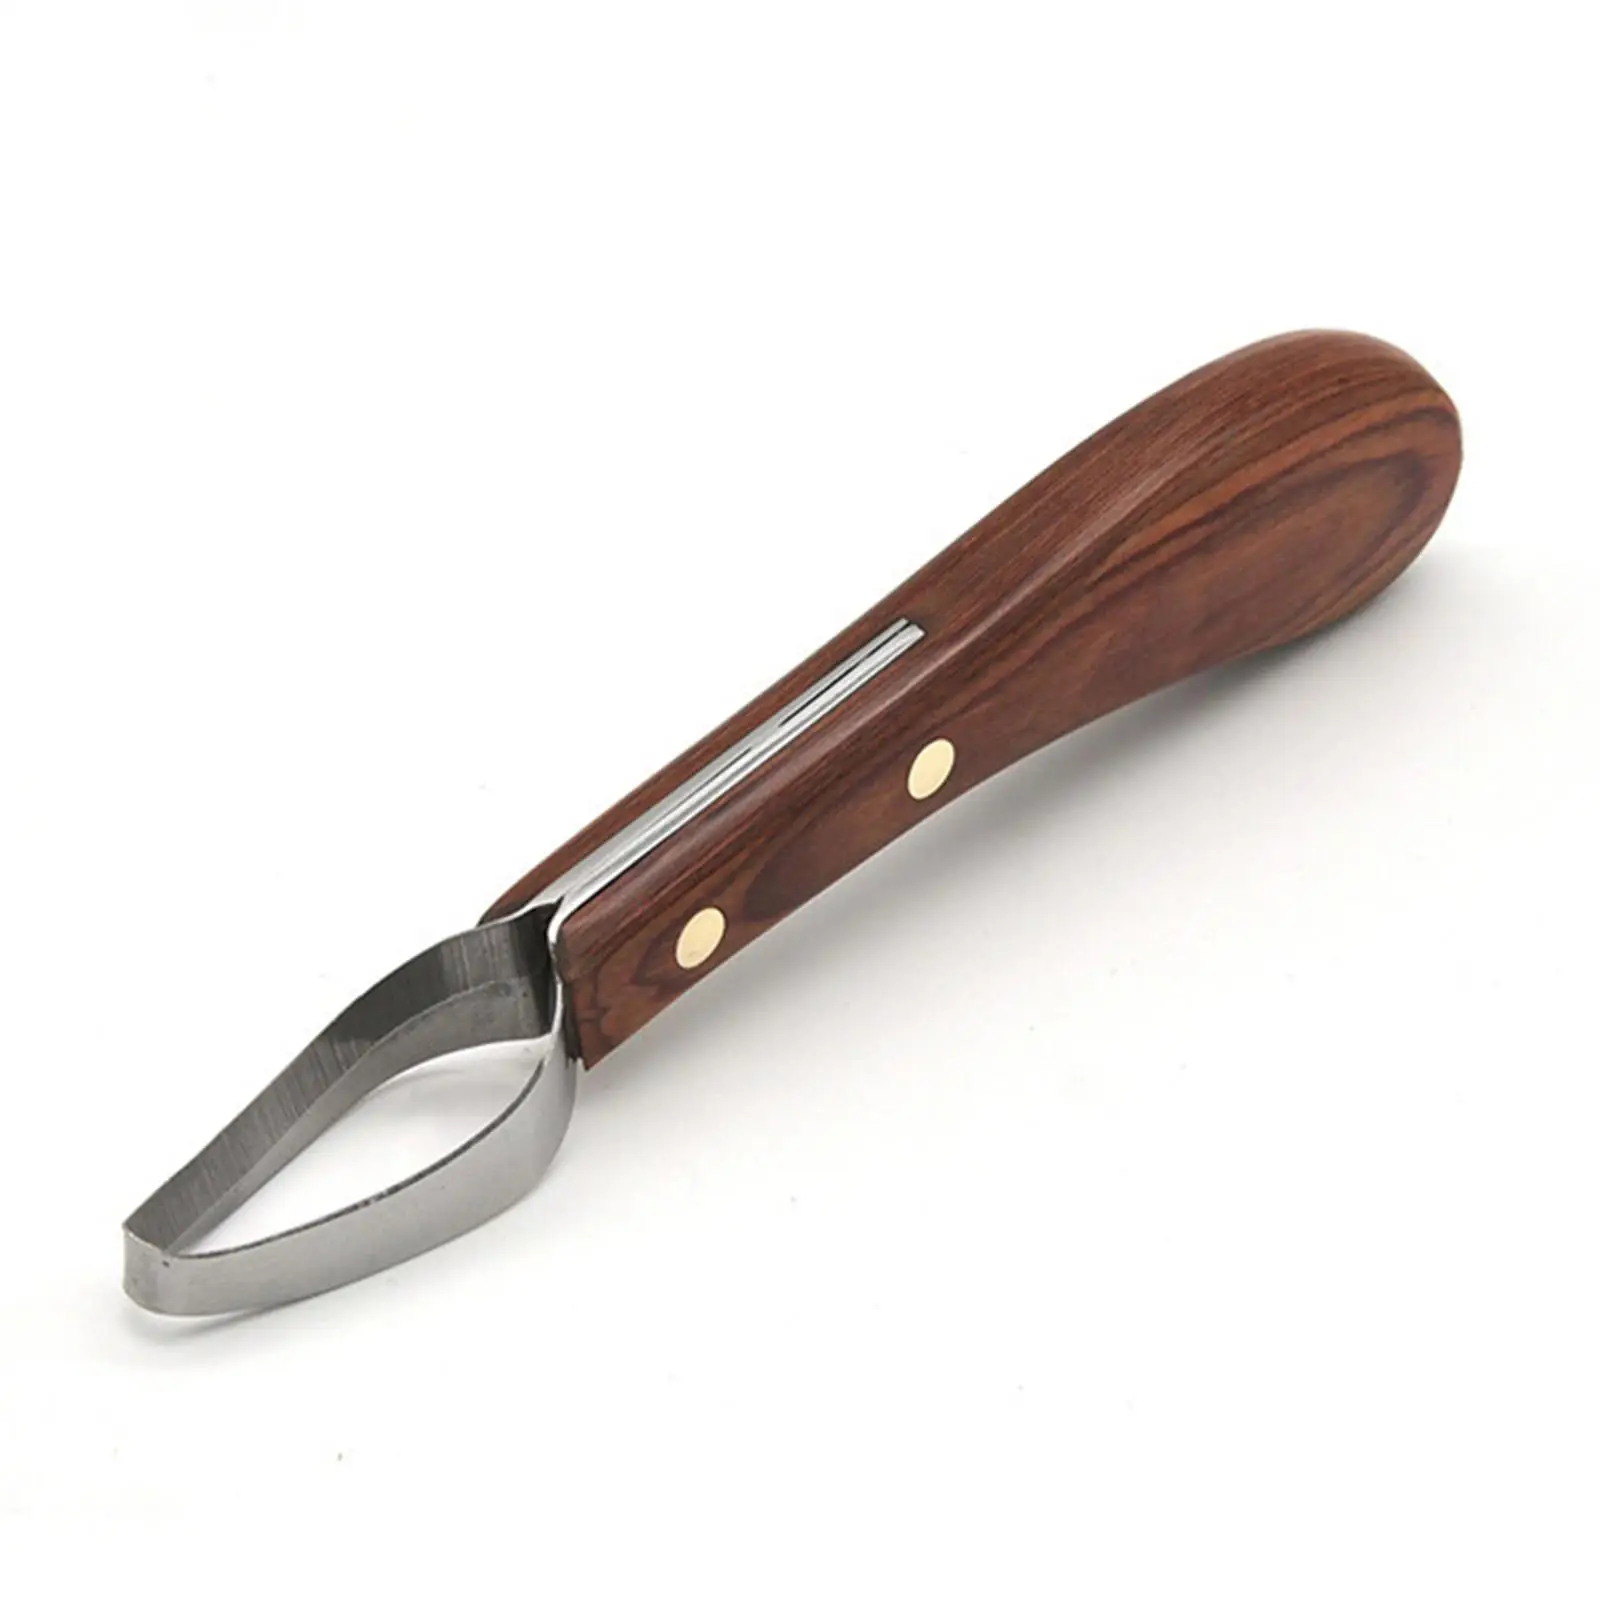 Hoof Knife with Wooden Handle Hoof Cutting Tool for Sheep Animal Cattle